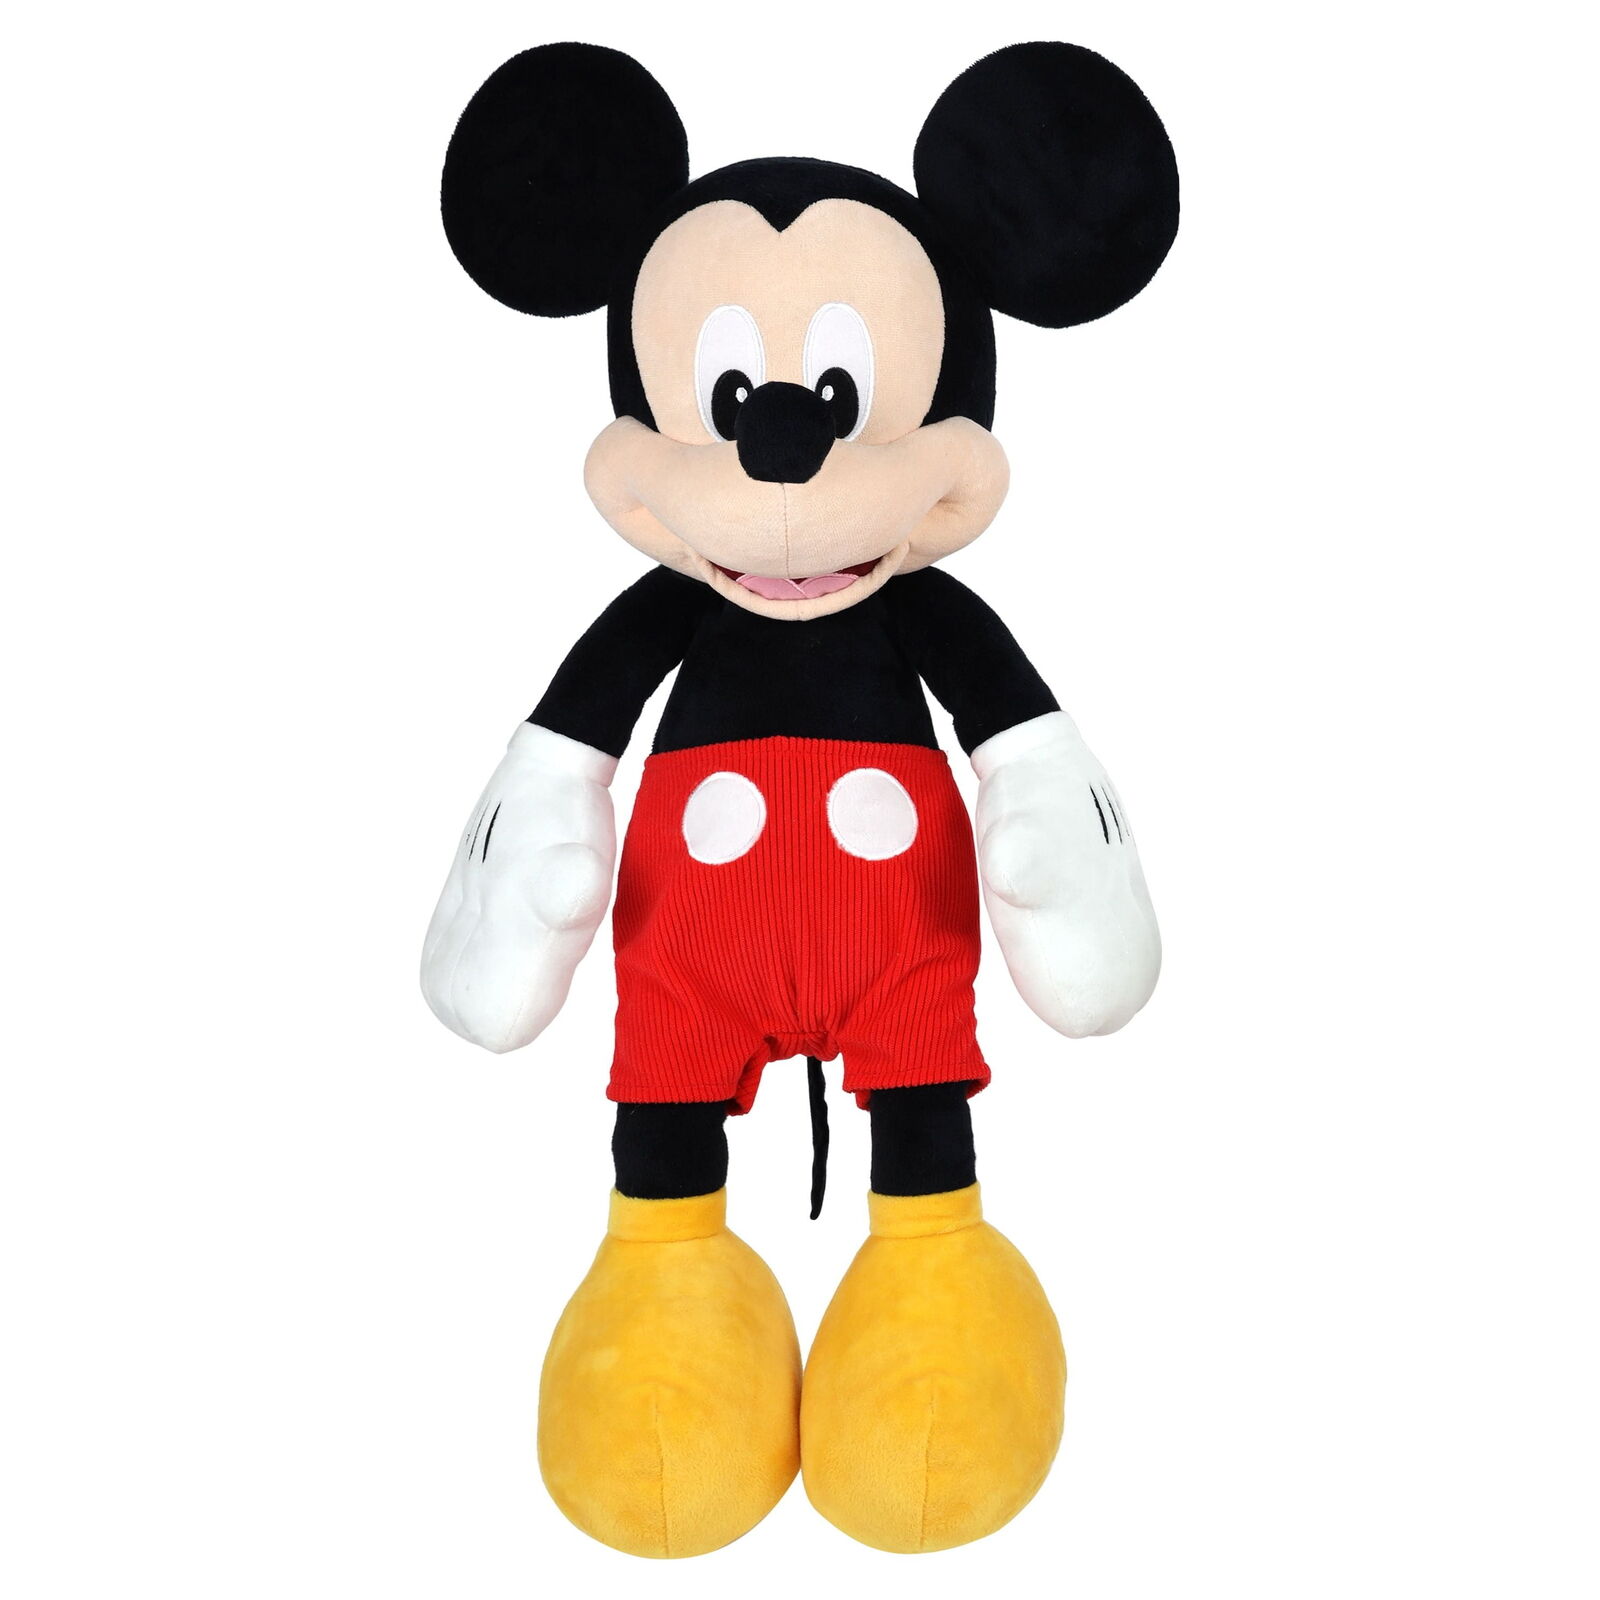 Jumbo 25-inch Plush Mickey Mouse, Officially Licensed